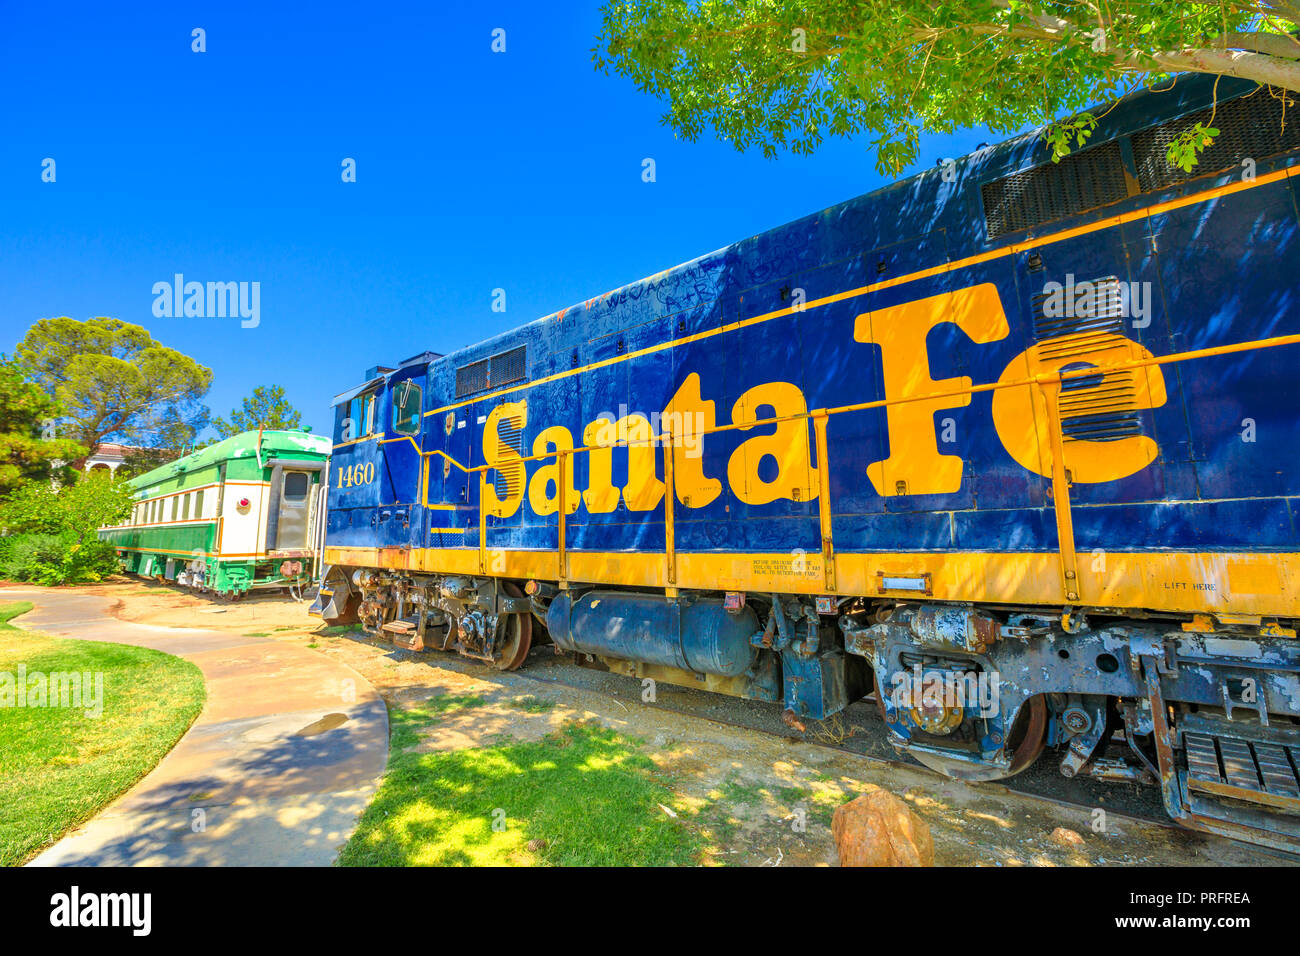 Barstow, California, USA - August 15, 2018: Santa Fe wagon at Western America Railroad Museum near Harvey House Railroad Depotis dedicated to history of railroading in Pacific Southwest. Stock Photo